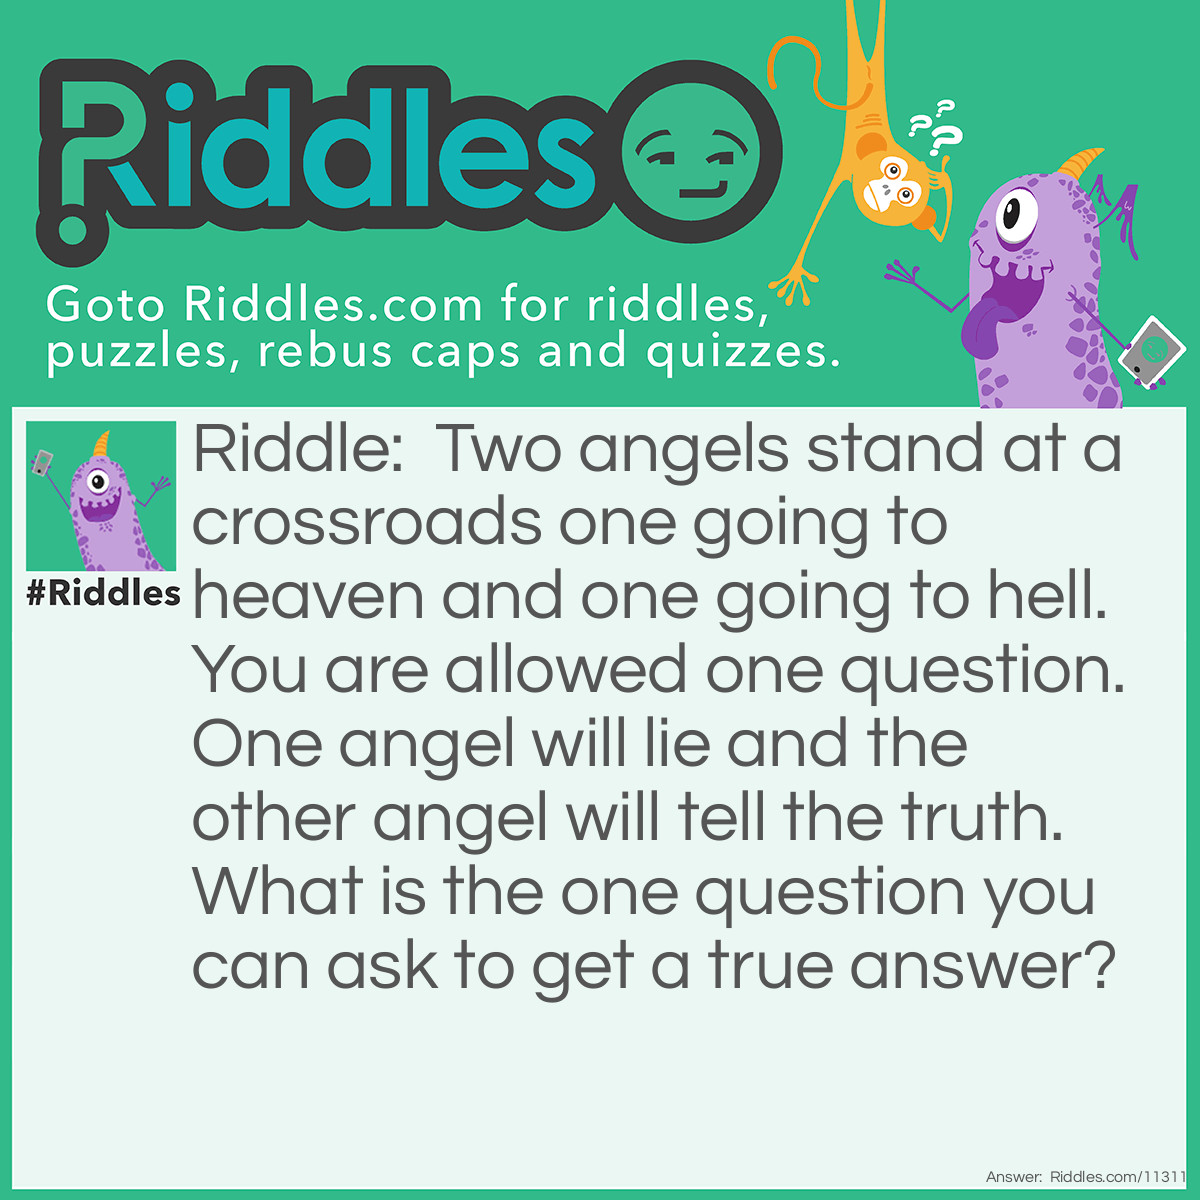 Riddle: Two angels stand at a crossroads one going to heaven and one going to hell. You are allowed one question. One angel will lie and the other angel will tell the truth. What is the one question you can ask to get a true answer? Answer: unknown